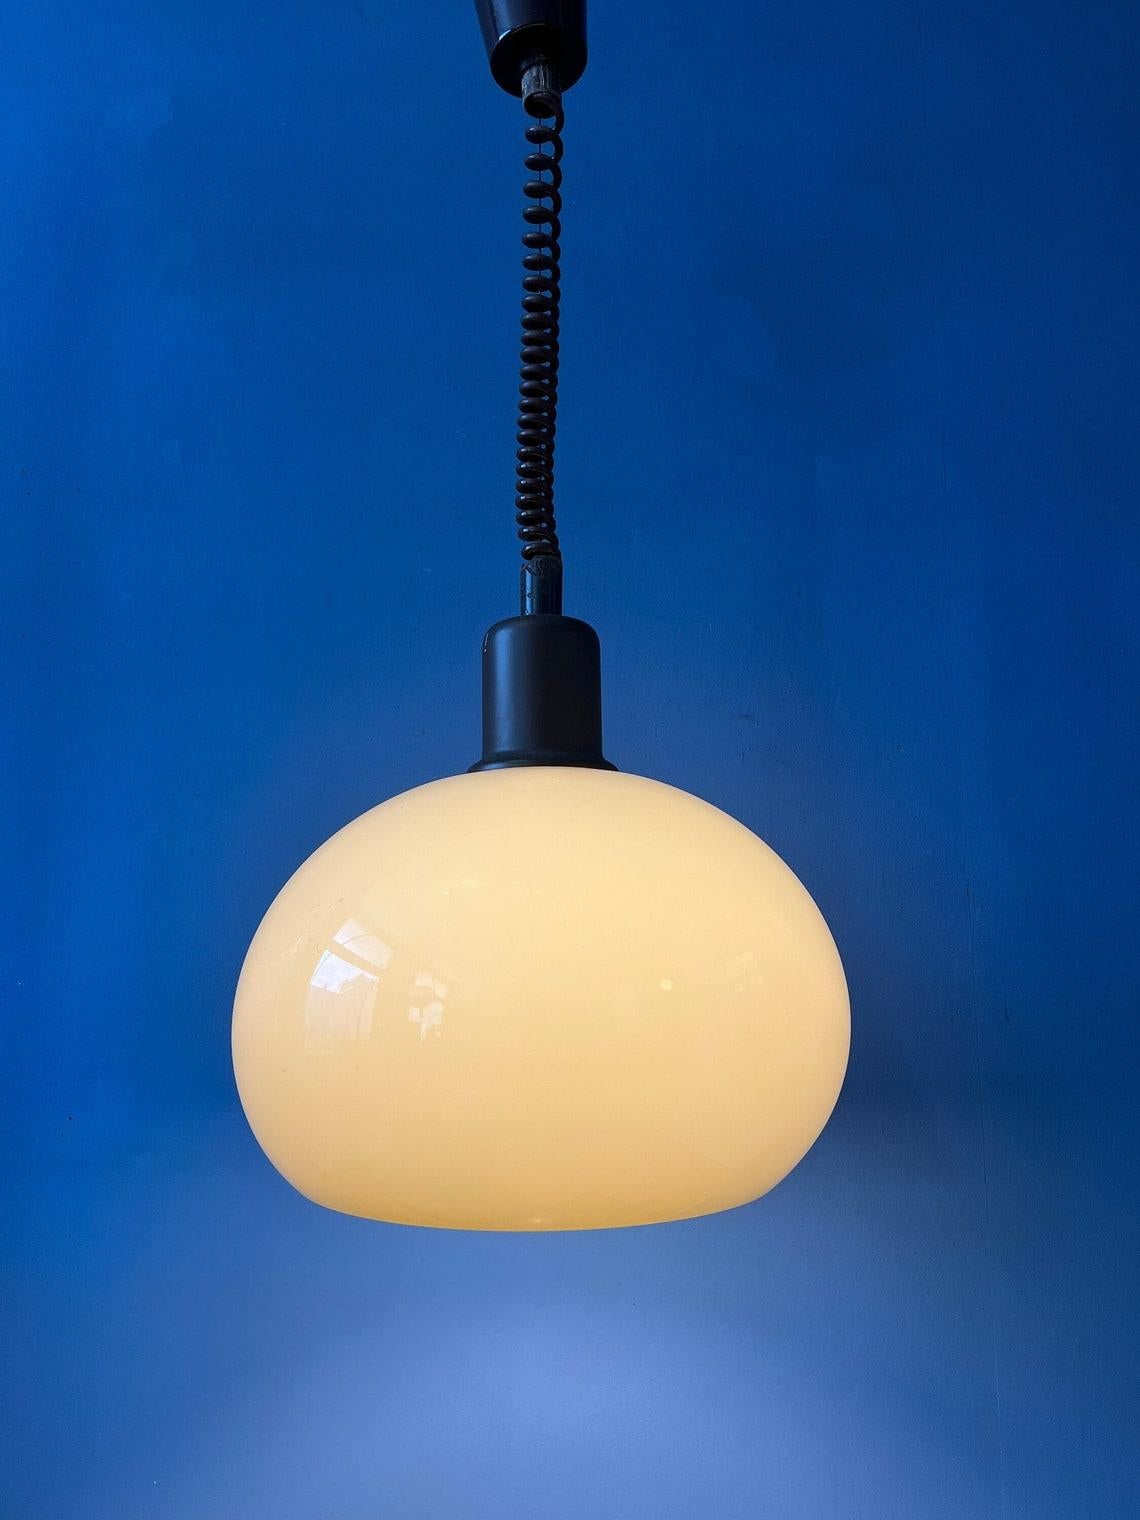 Vintage space age mushroom pendant lamp in beige colour. The acrylic glass shade produces a magnificent glow. The height of the lamp can easily be adjusted with the suspension mechanism. The lamp requires an E27/26 (standard) lightbulb.

Additional